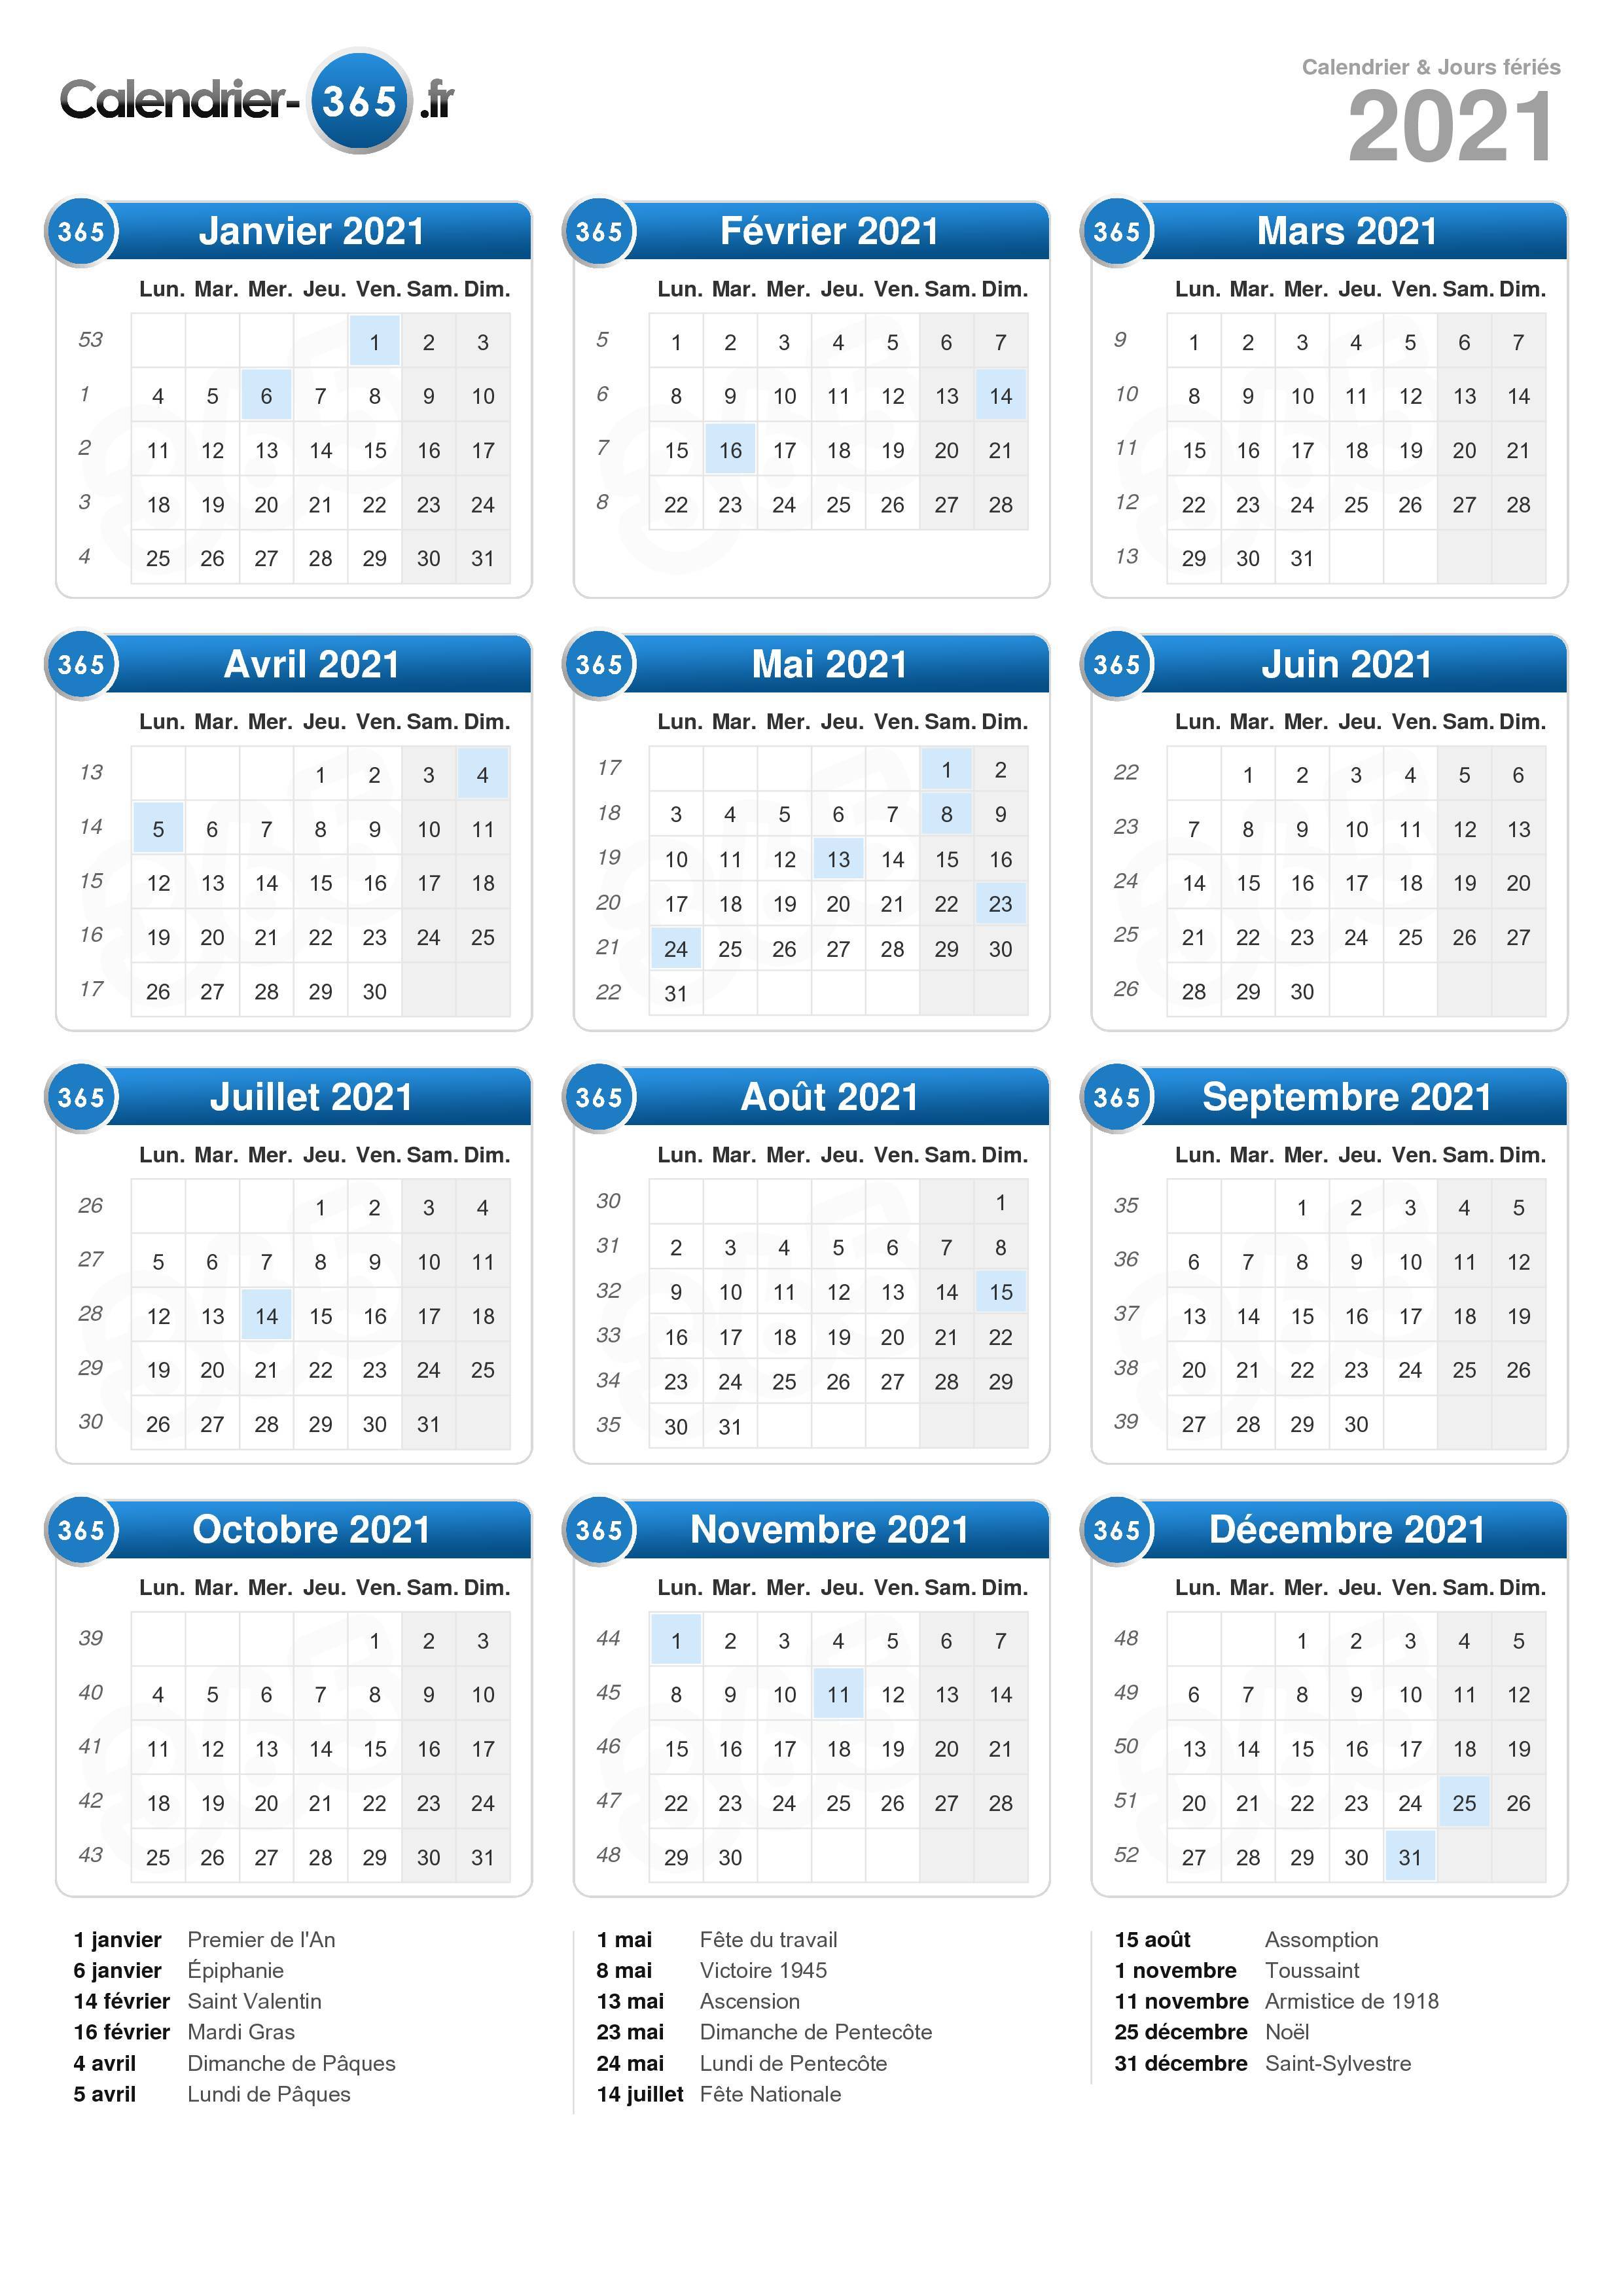 Calendrier 2021 Semaines Paires Calendrier 2021